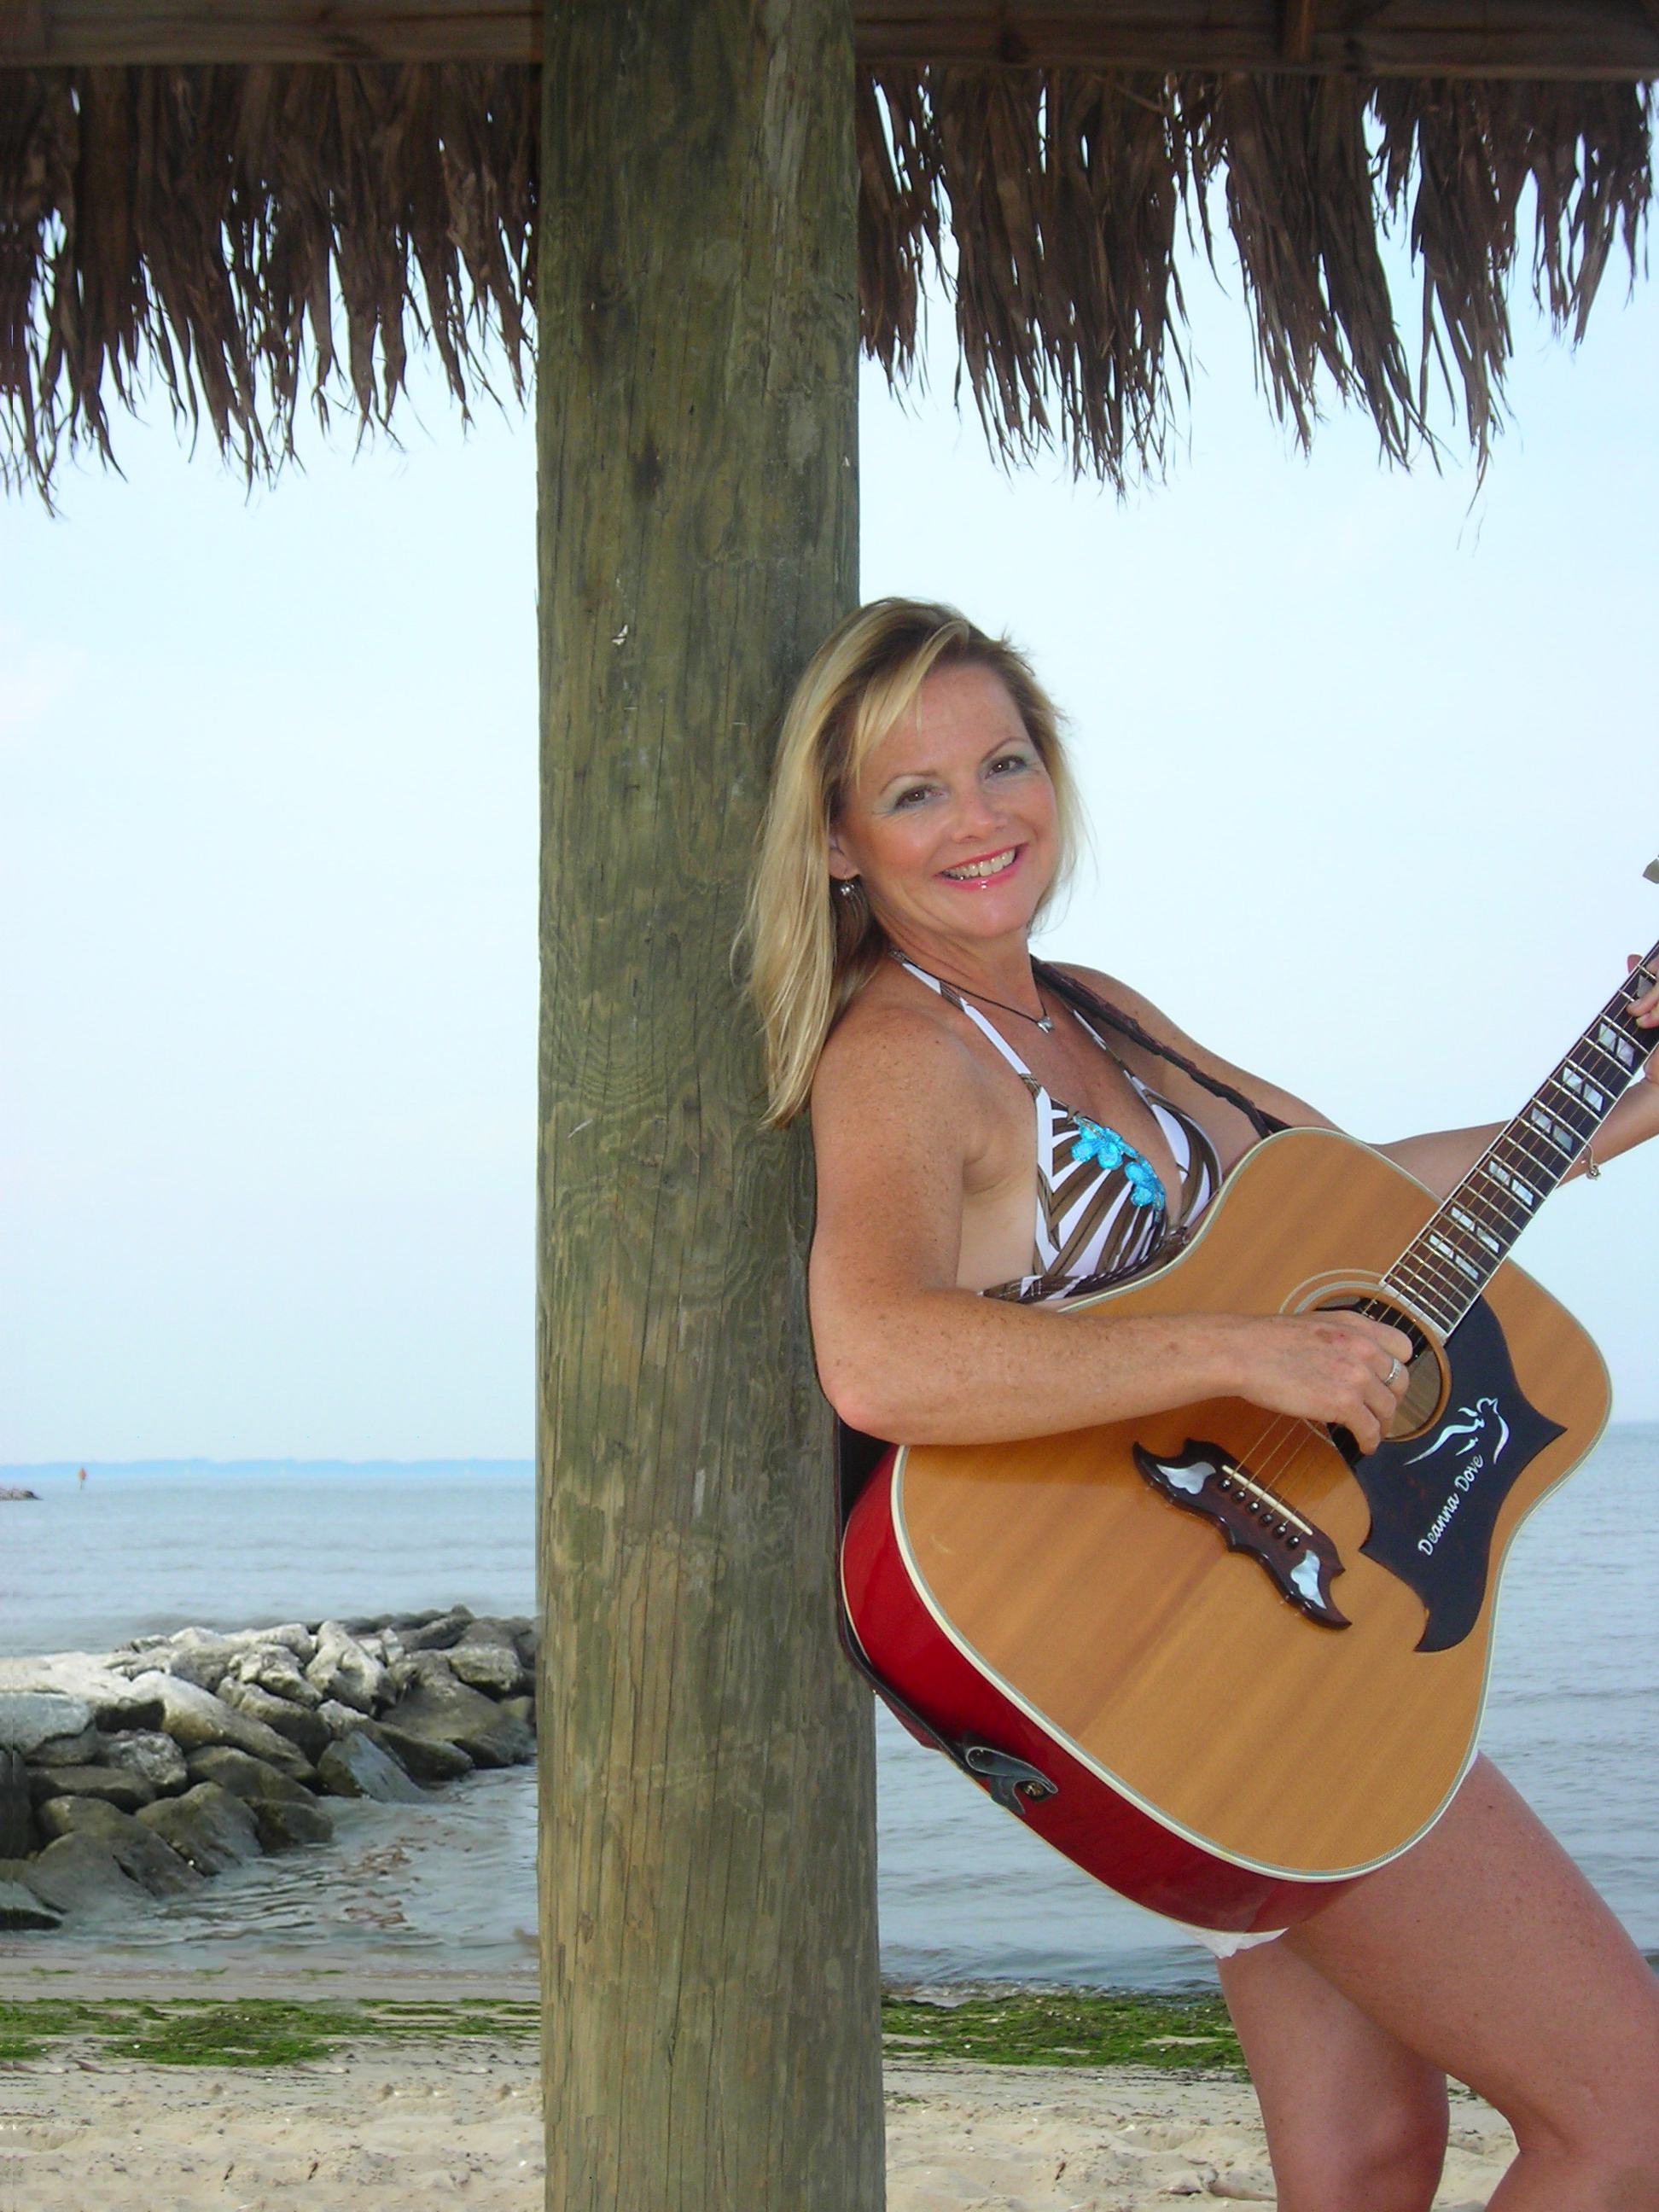 Deanna Dove singer/songwriter leaning on a tropical tree with guitar